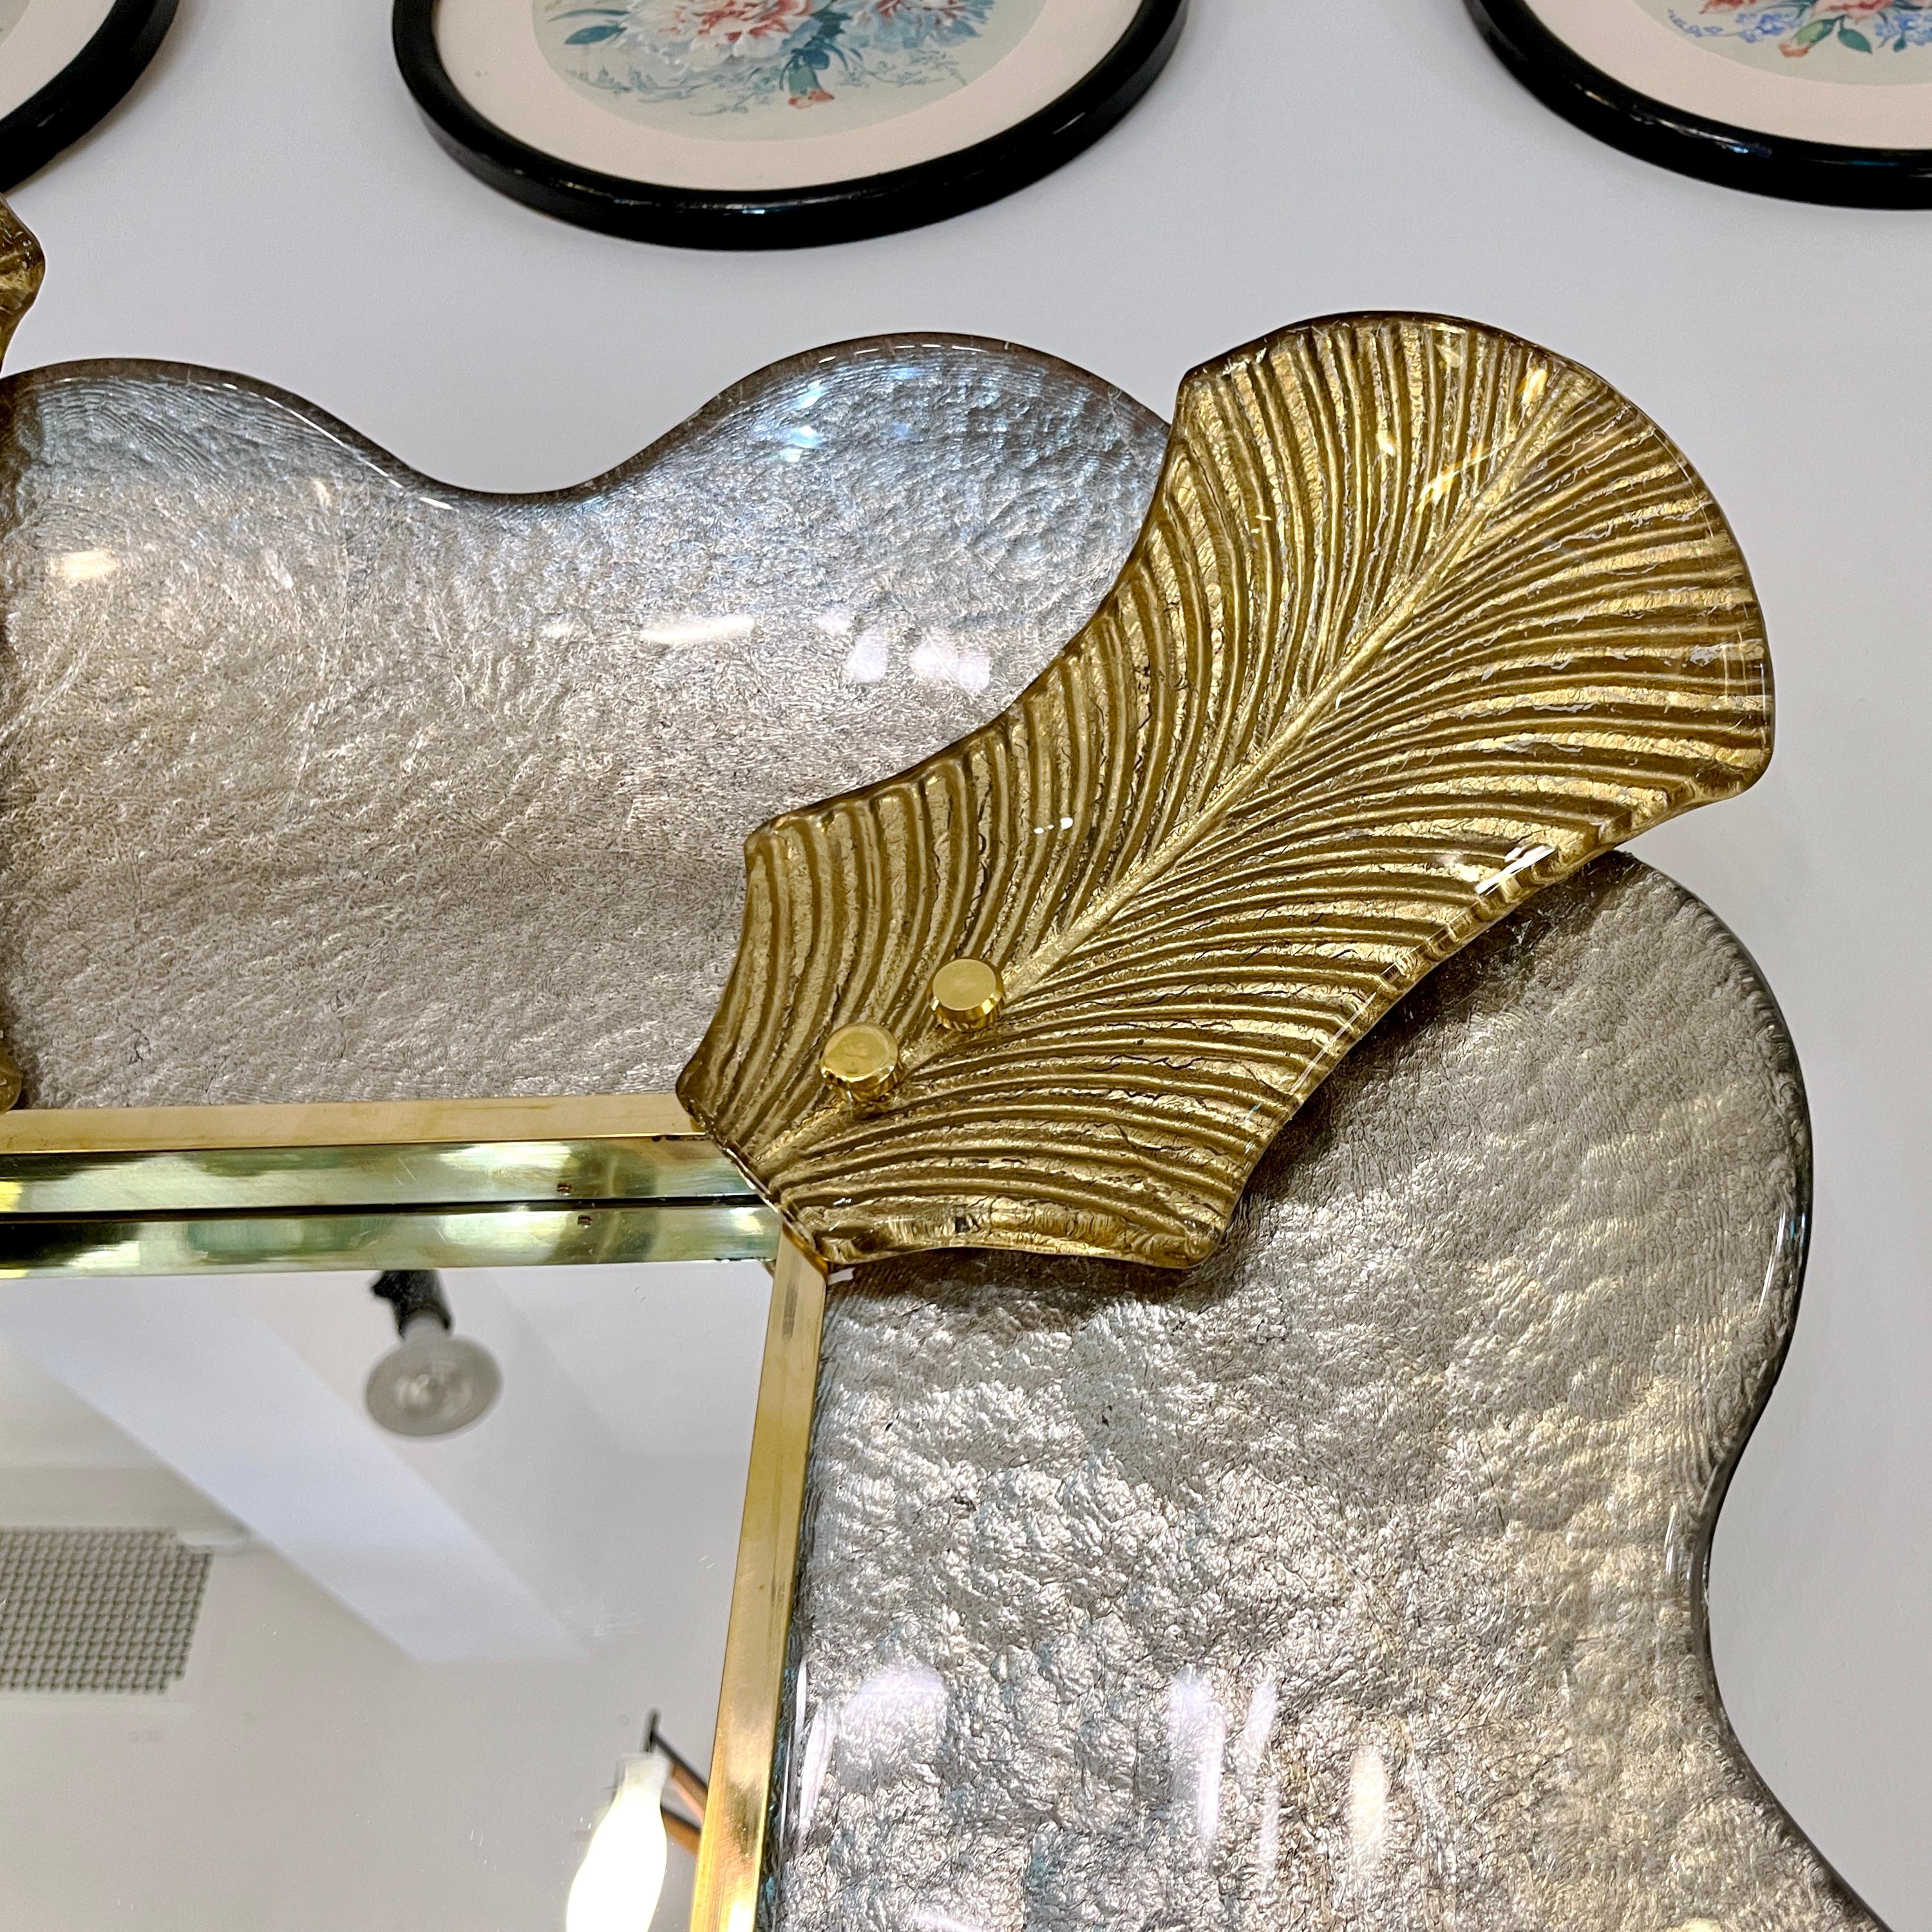 Bespoke Italian Art Deco Style Curved Leaf Gold Silver Murano Glass Brass Mirror For Sale 2